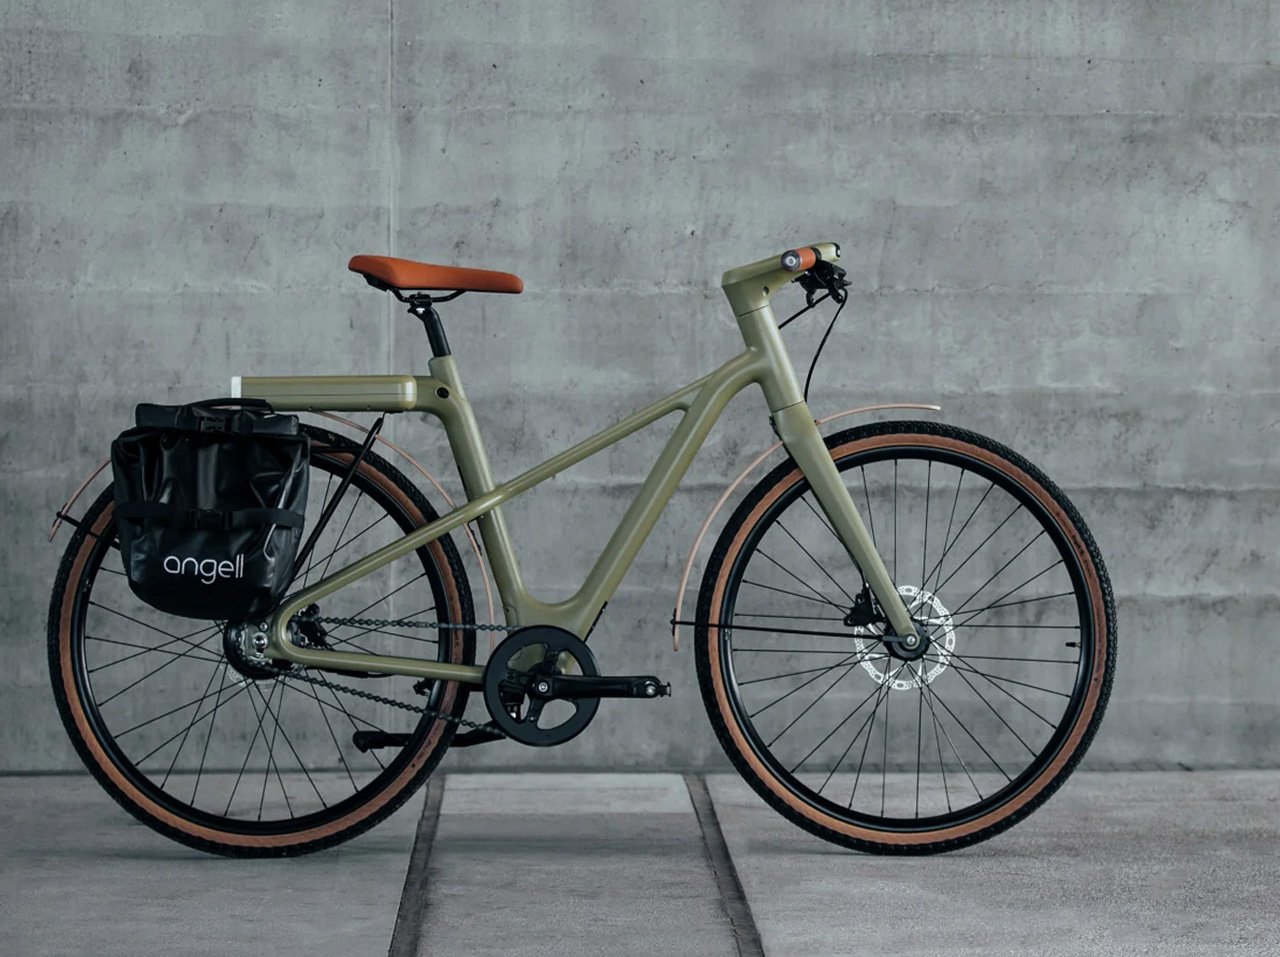 #French bicycle brand Angell unveiled “one of the world’s lightest e-bikes”